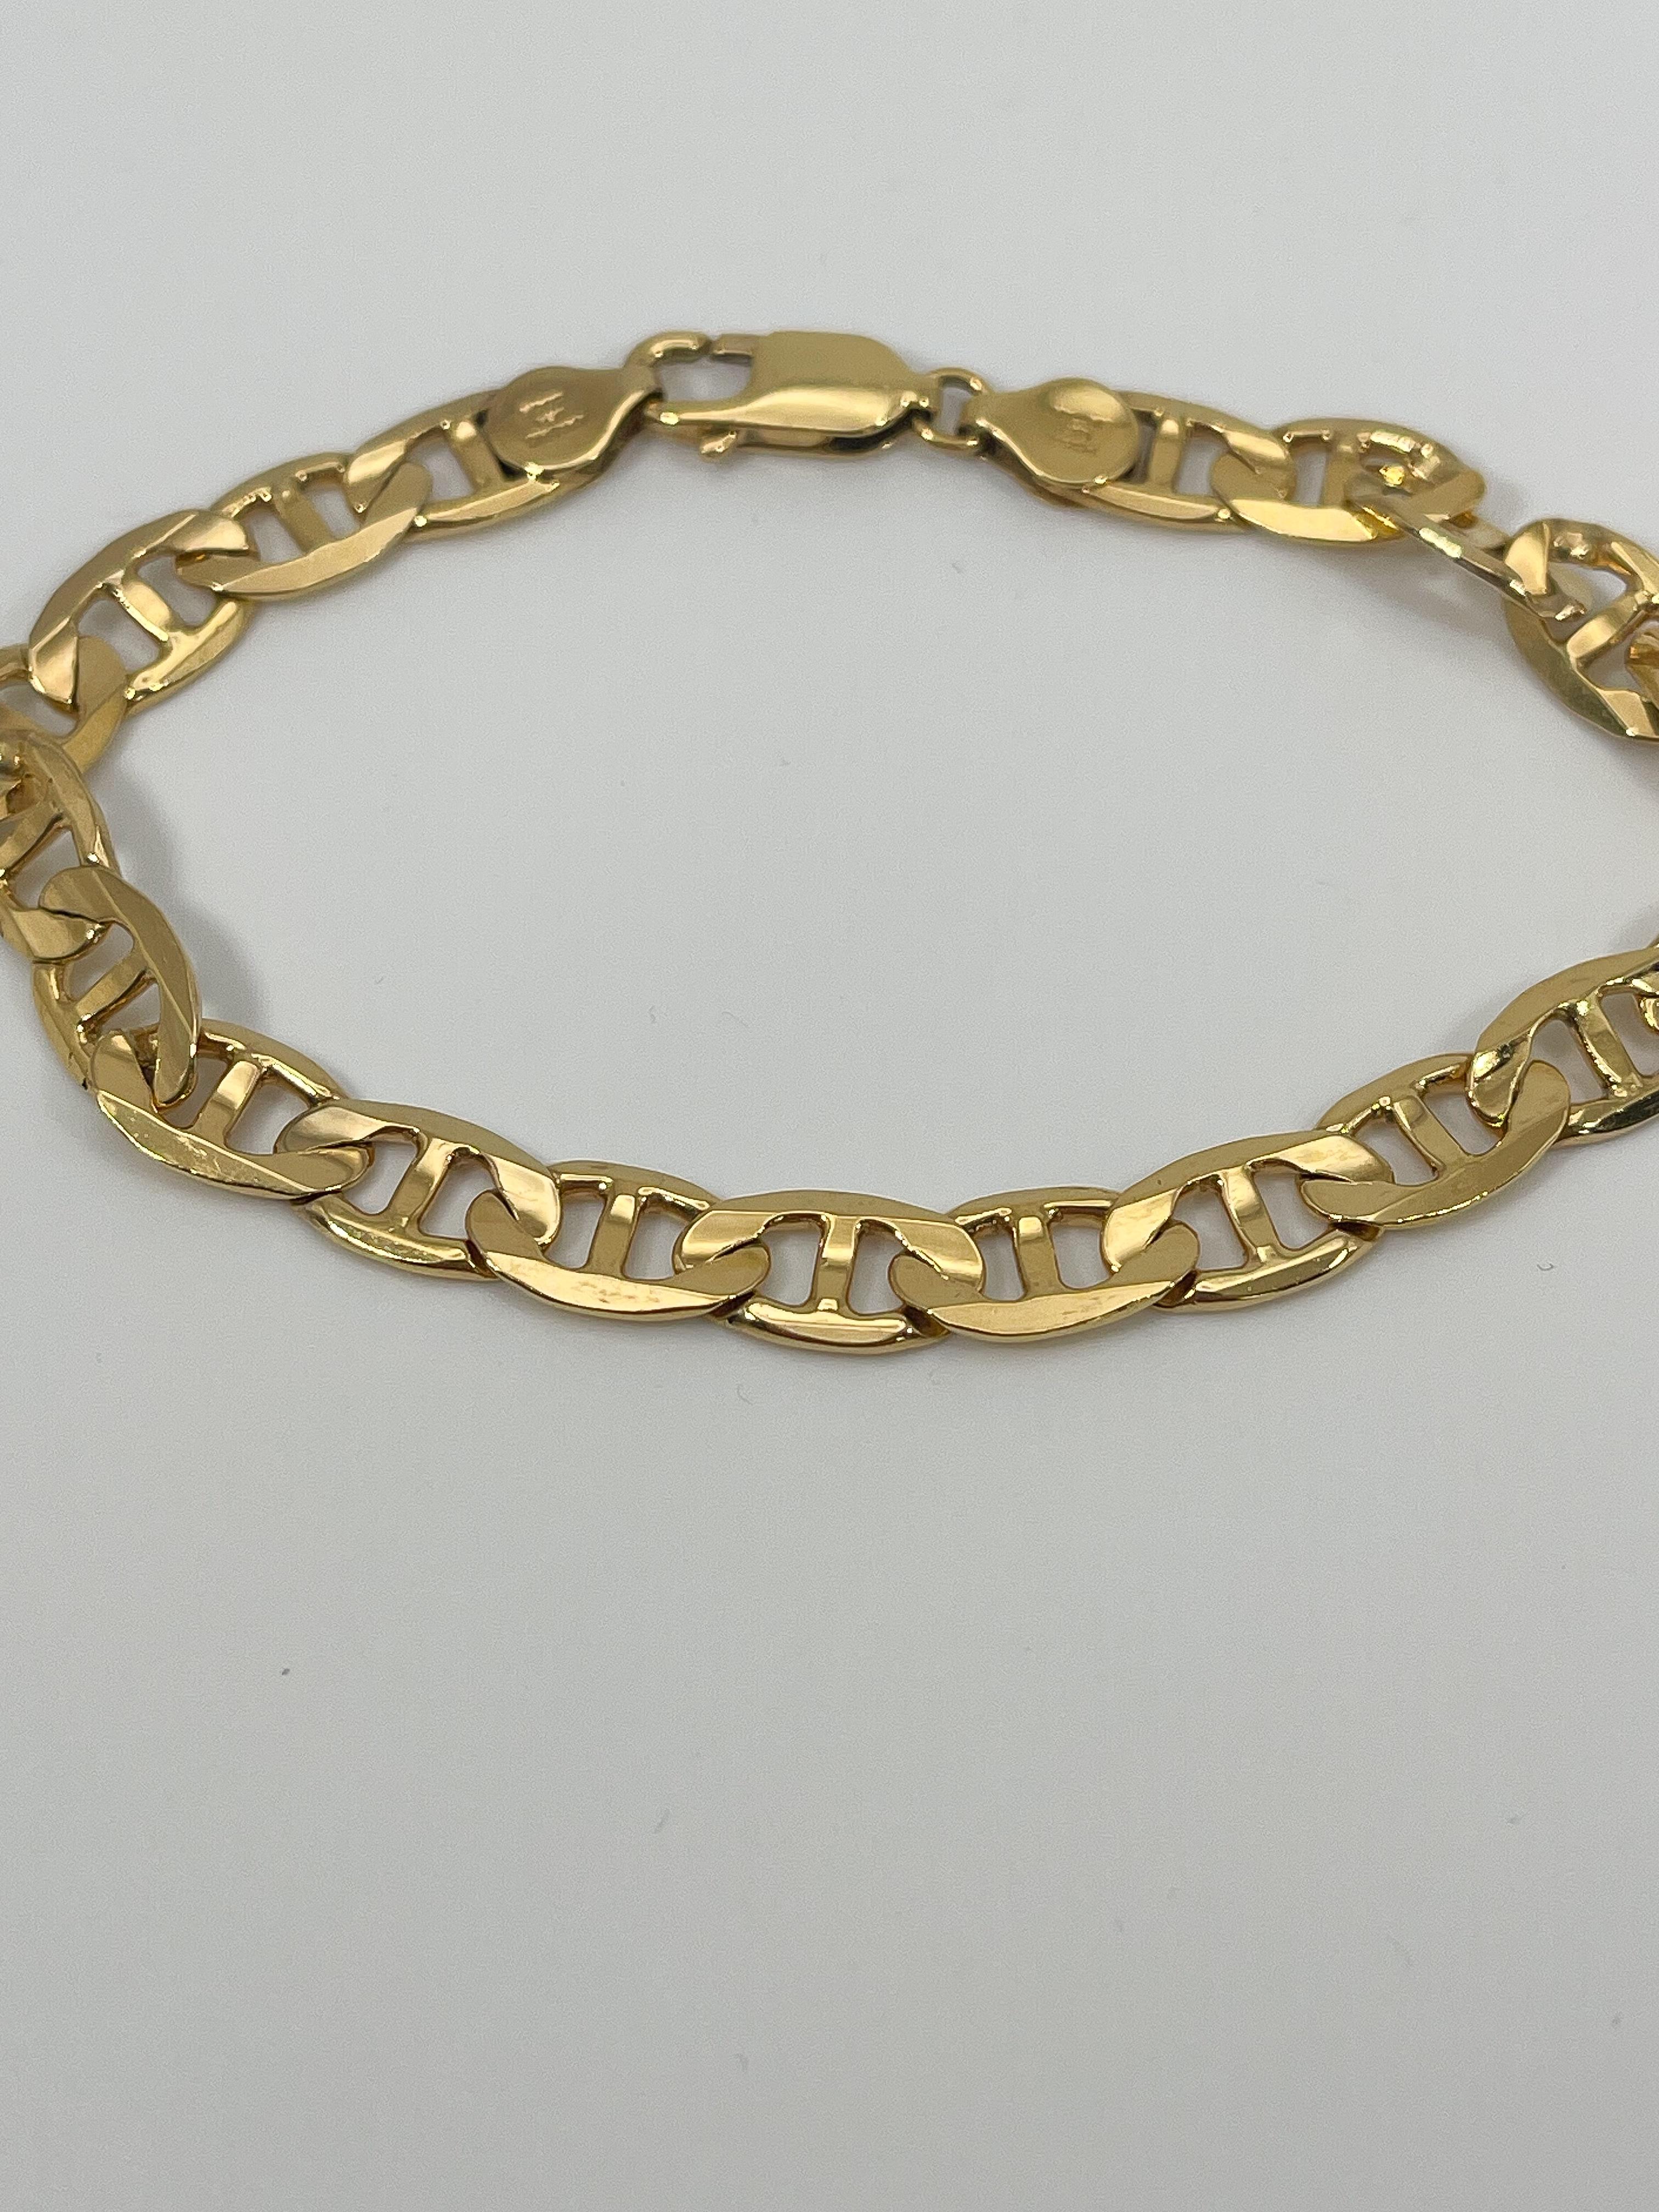 14k yellow gold men's concave anchor bracelet. The length of this bracelet is 9 inches, it has a width of 7.6 mm, has a lobster clasp to open and close, and it has a total weight of 17.8 grams.